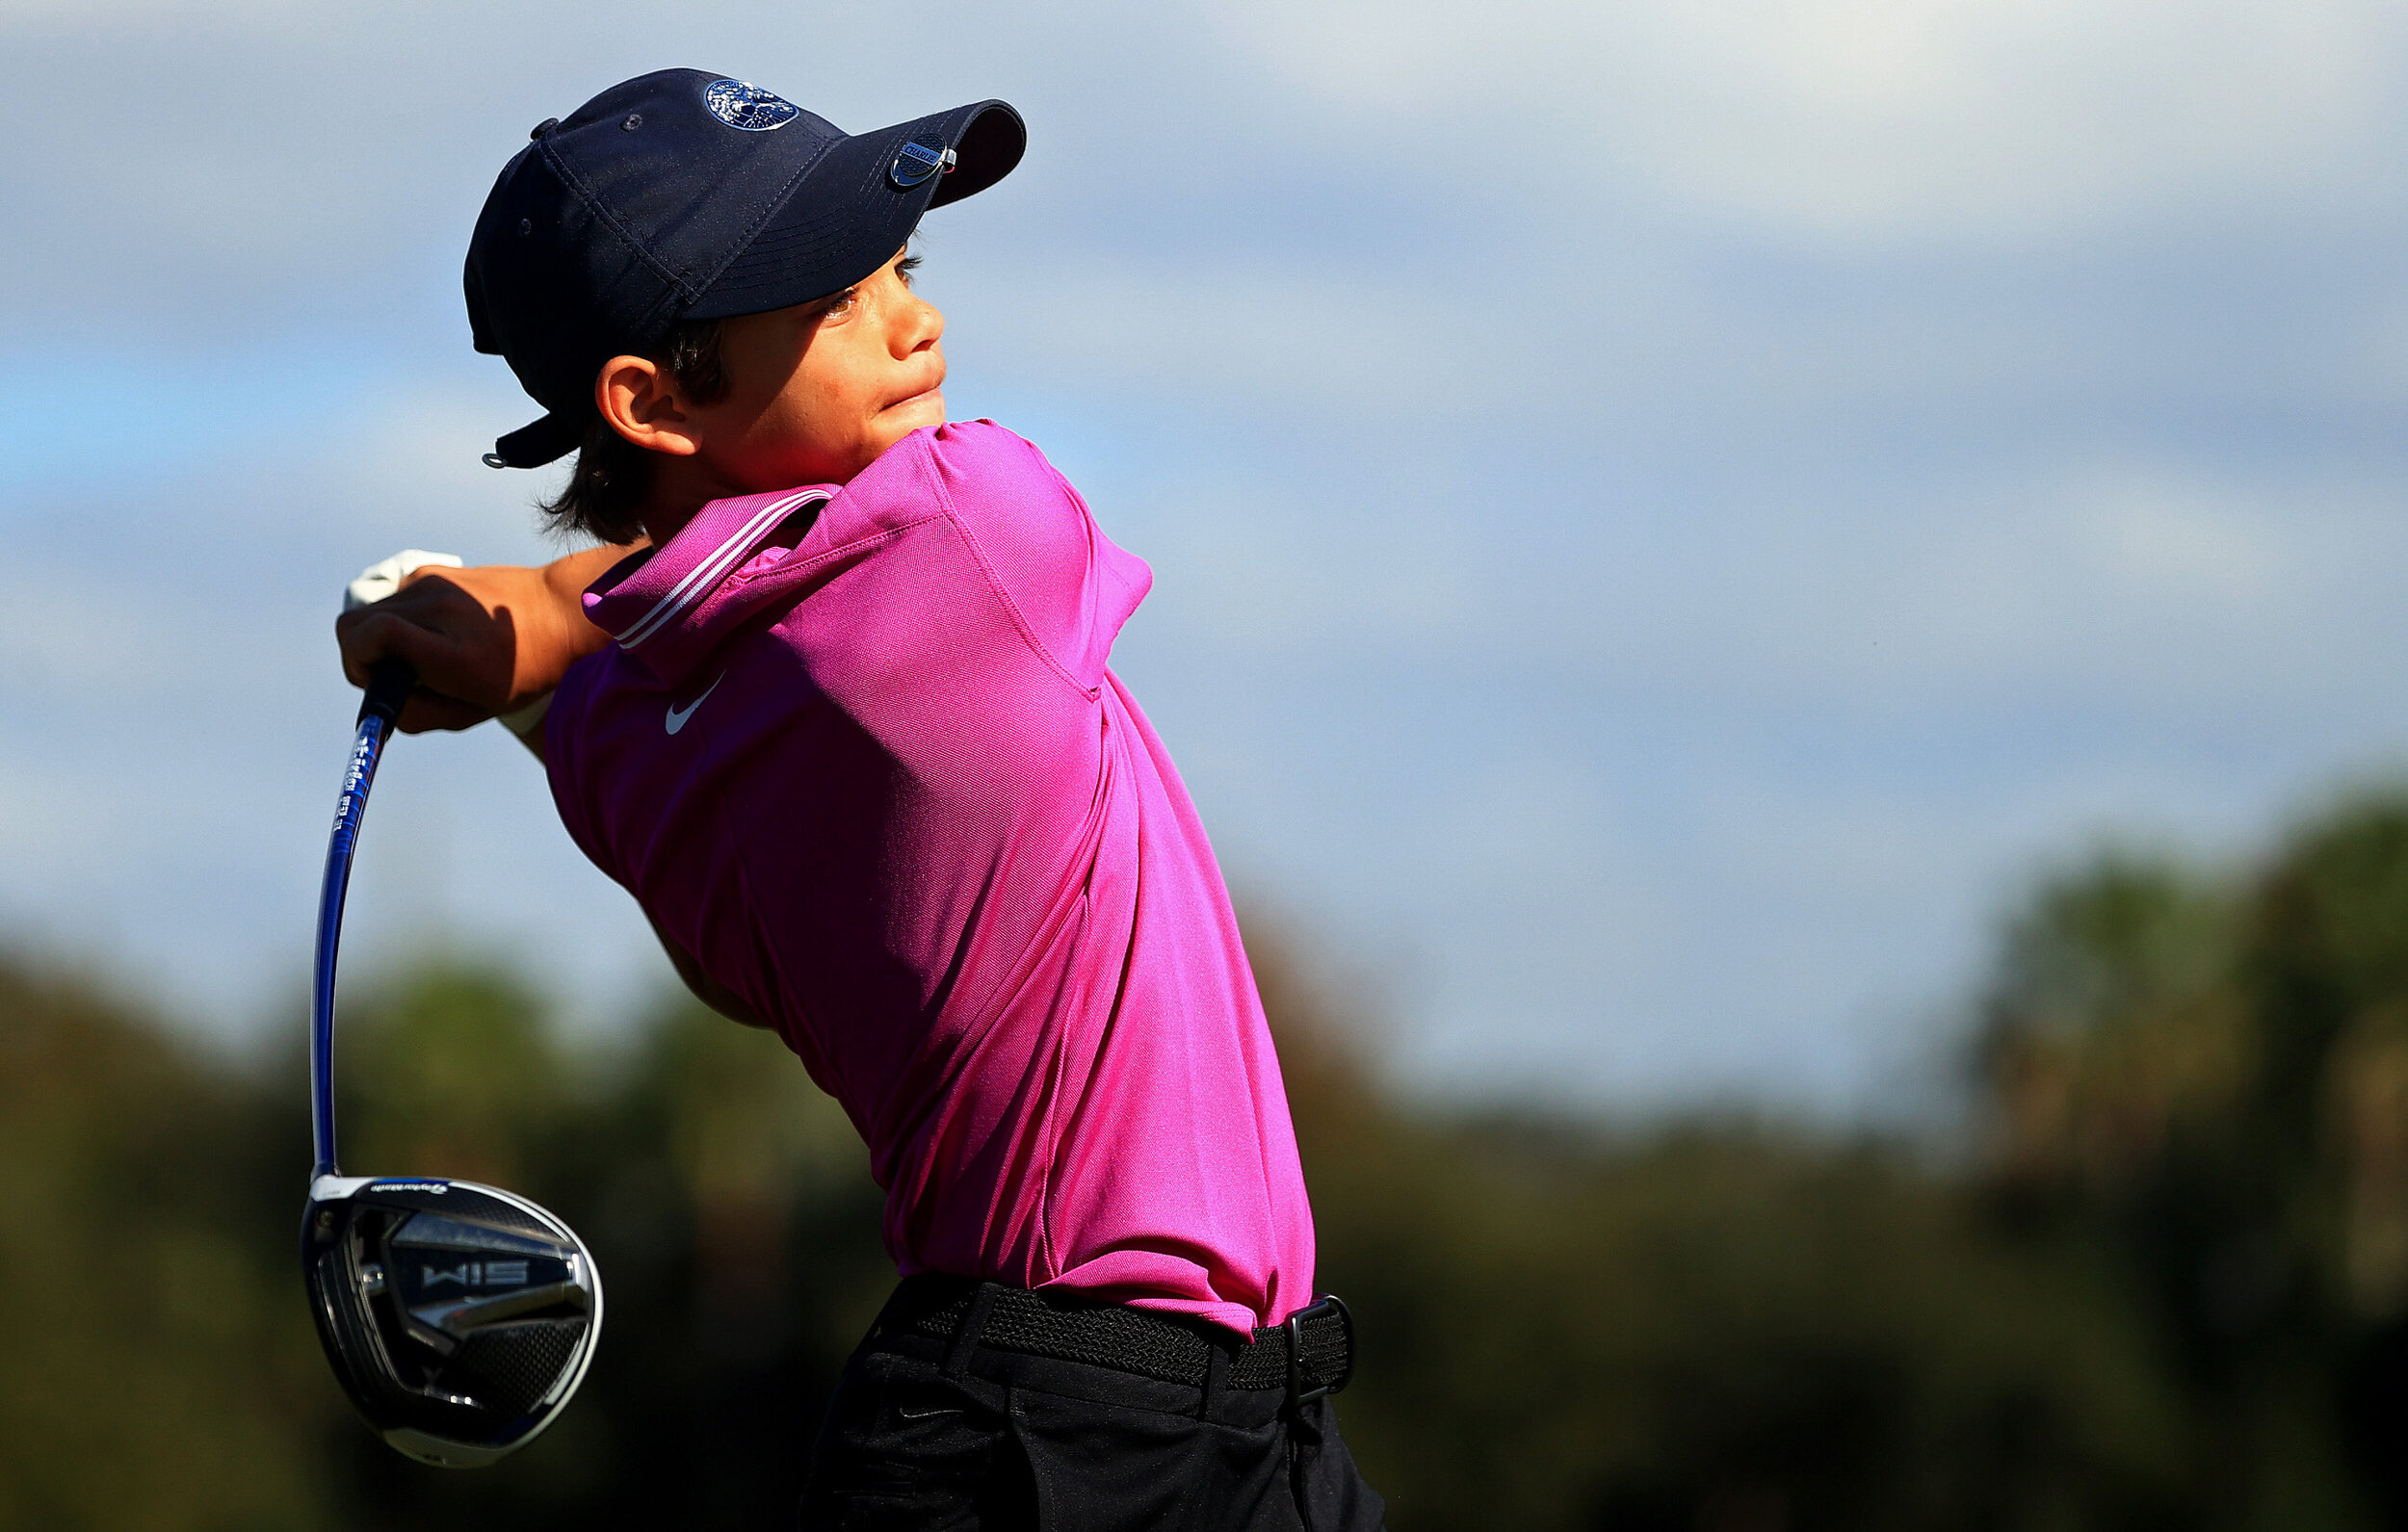  ORLANDO, FLORIDA - DECEMBER 19: Tiger Woods of the United States son Charlie Woods hits his tee shot on the ninth hole during the first round of the PNC Championship at the Ritz Carlton Golf Club on December 19, 2020 in Orlando, Florida. (Photo by M